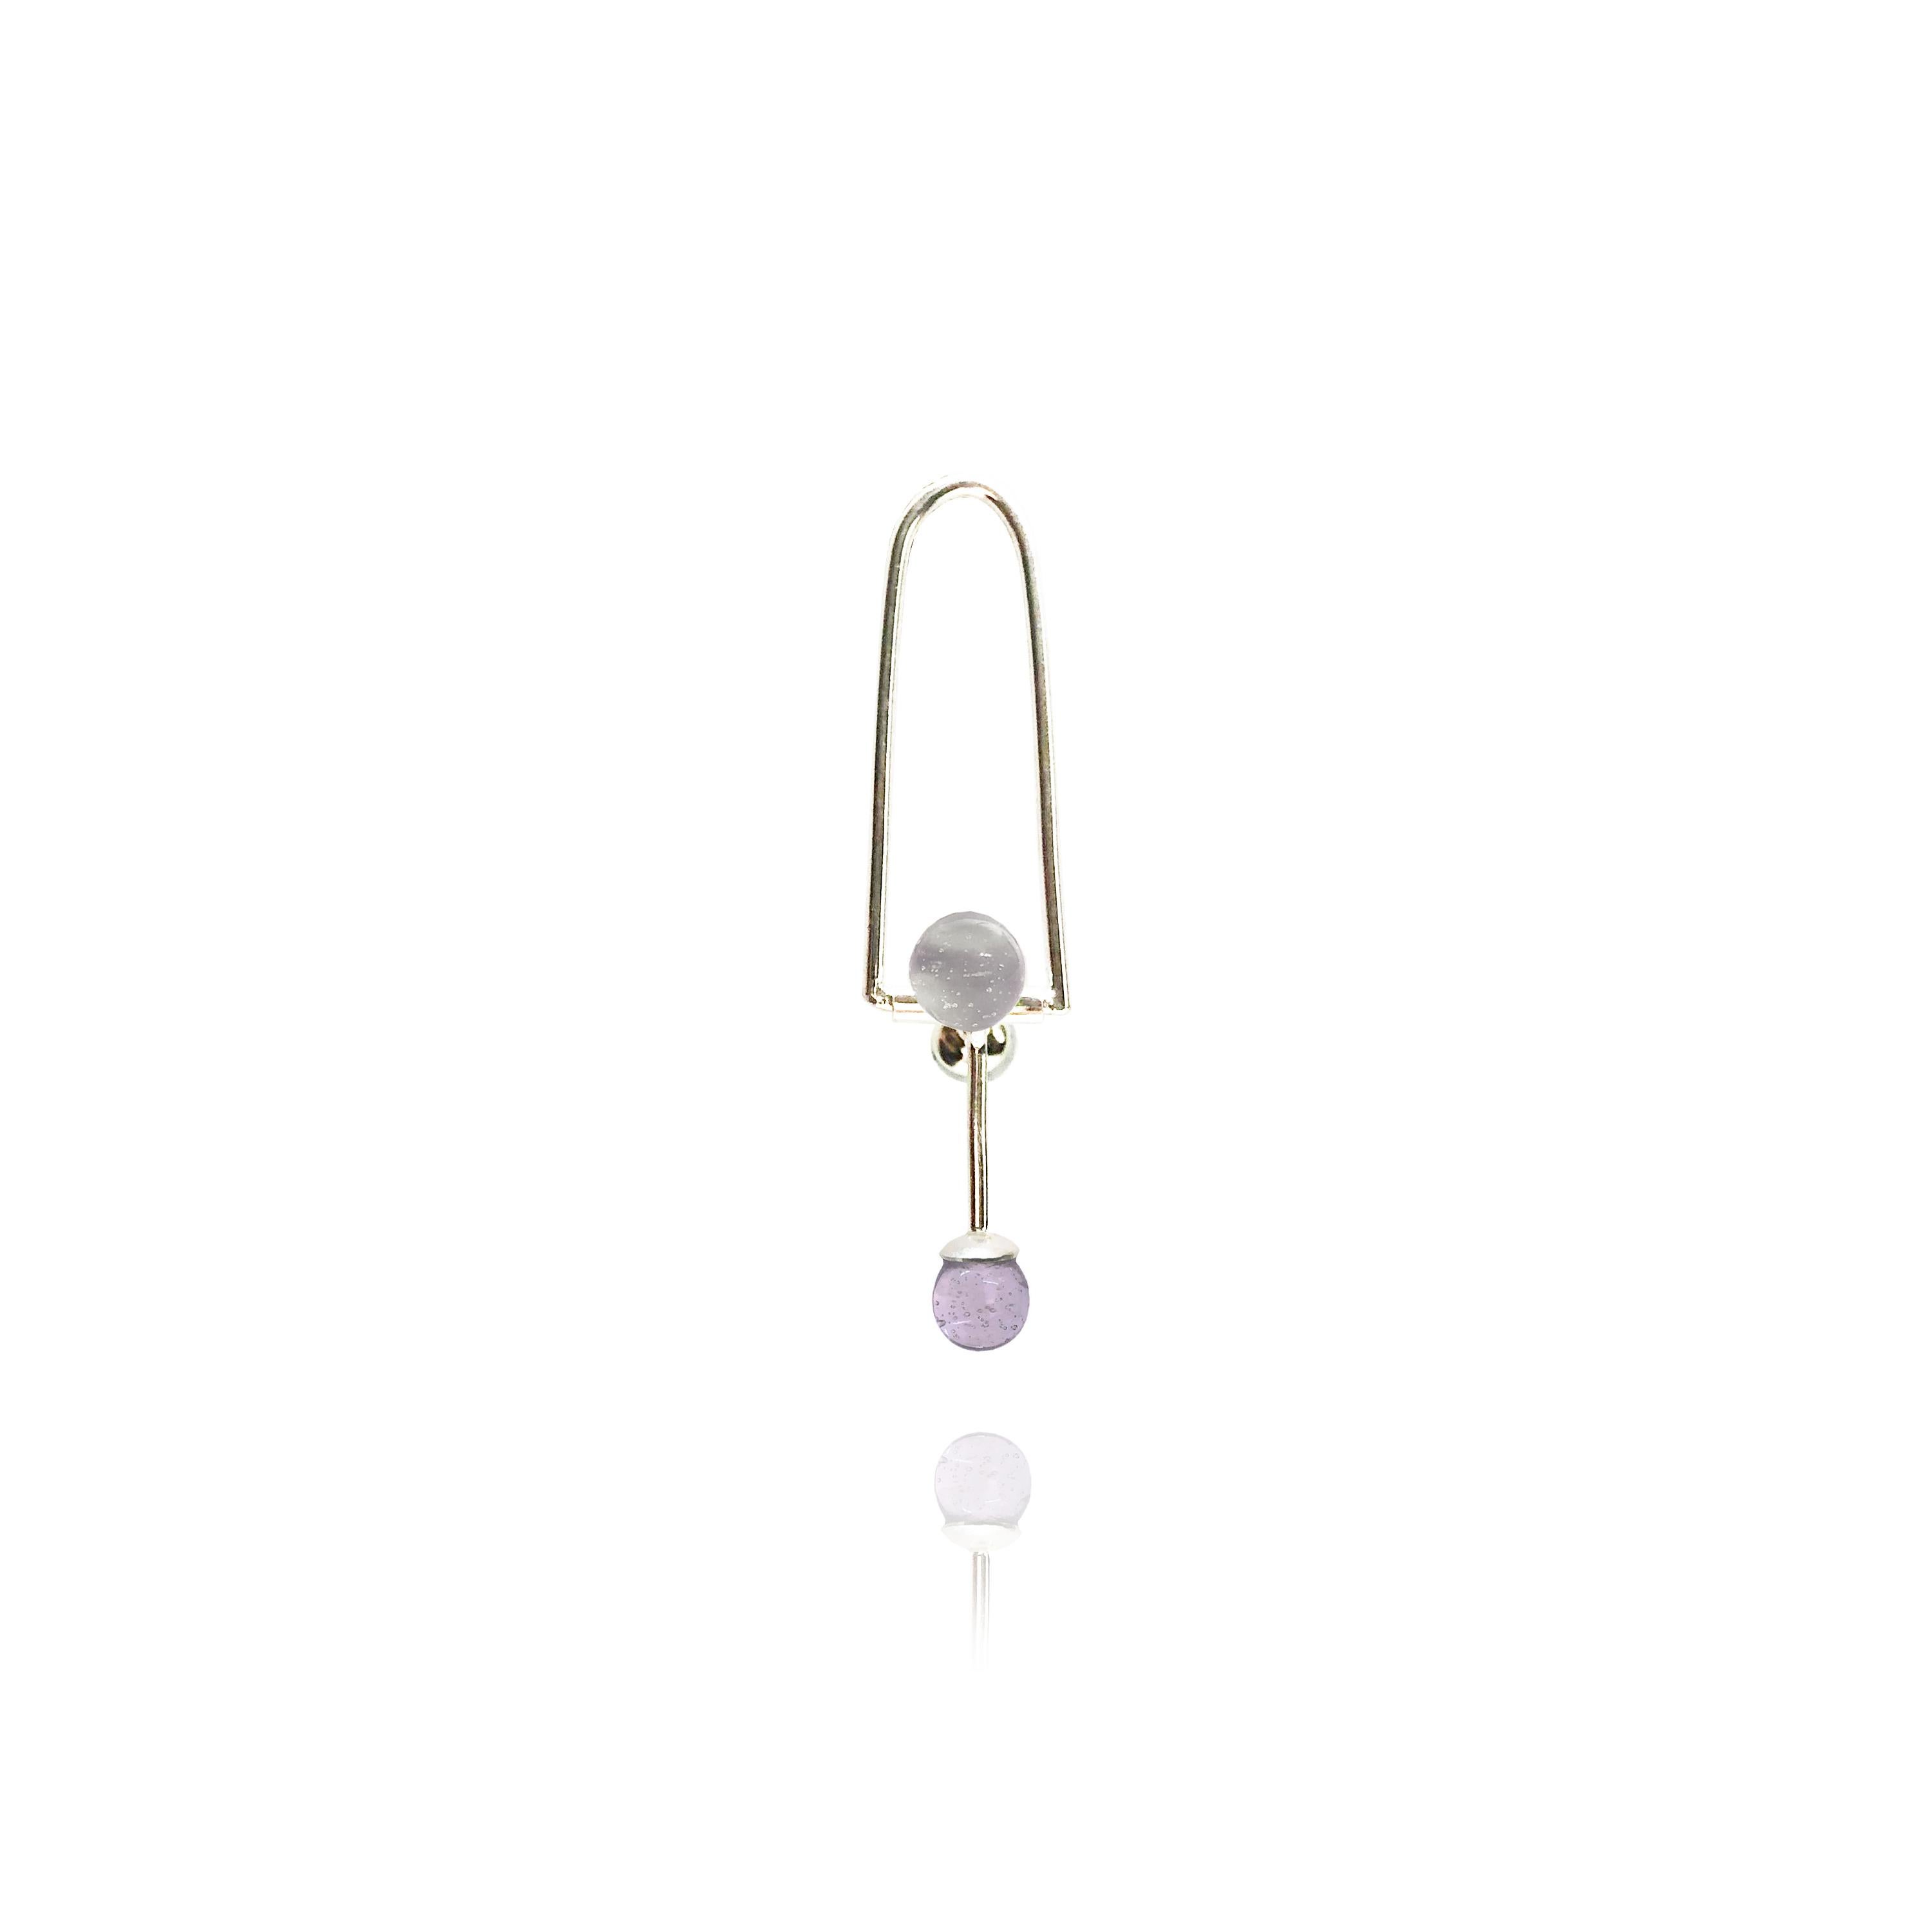 Borosilicate Glass and Sterling Silver
A single earring made to turn heads. Each glass orb is permanently fixed at each end of the three 